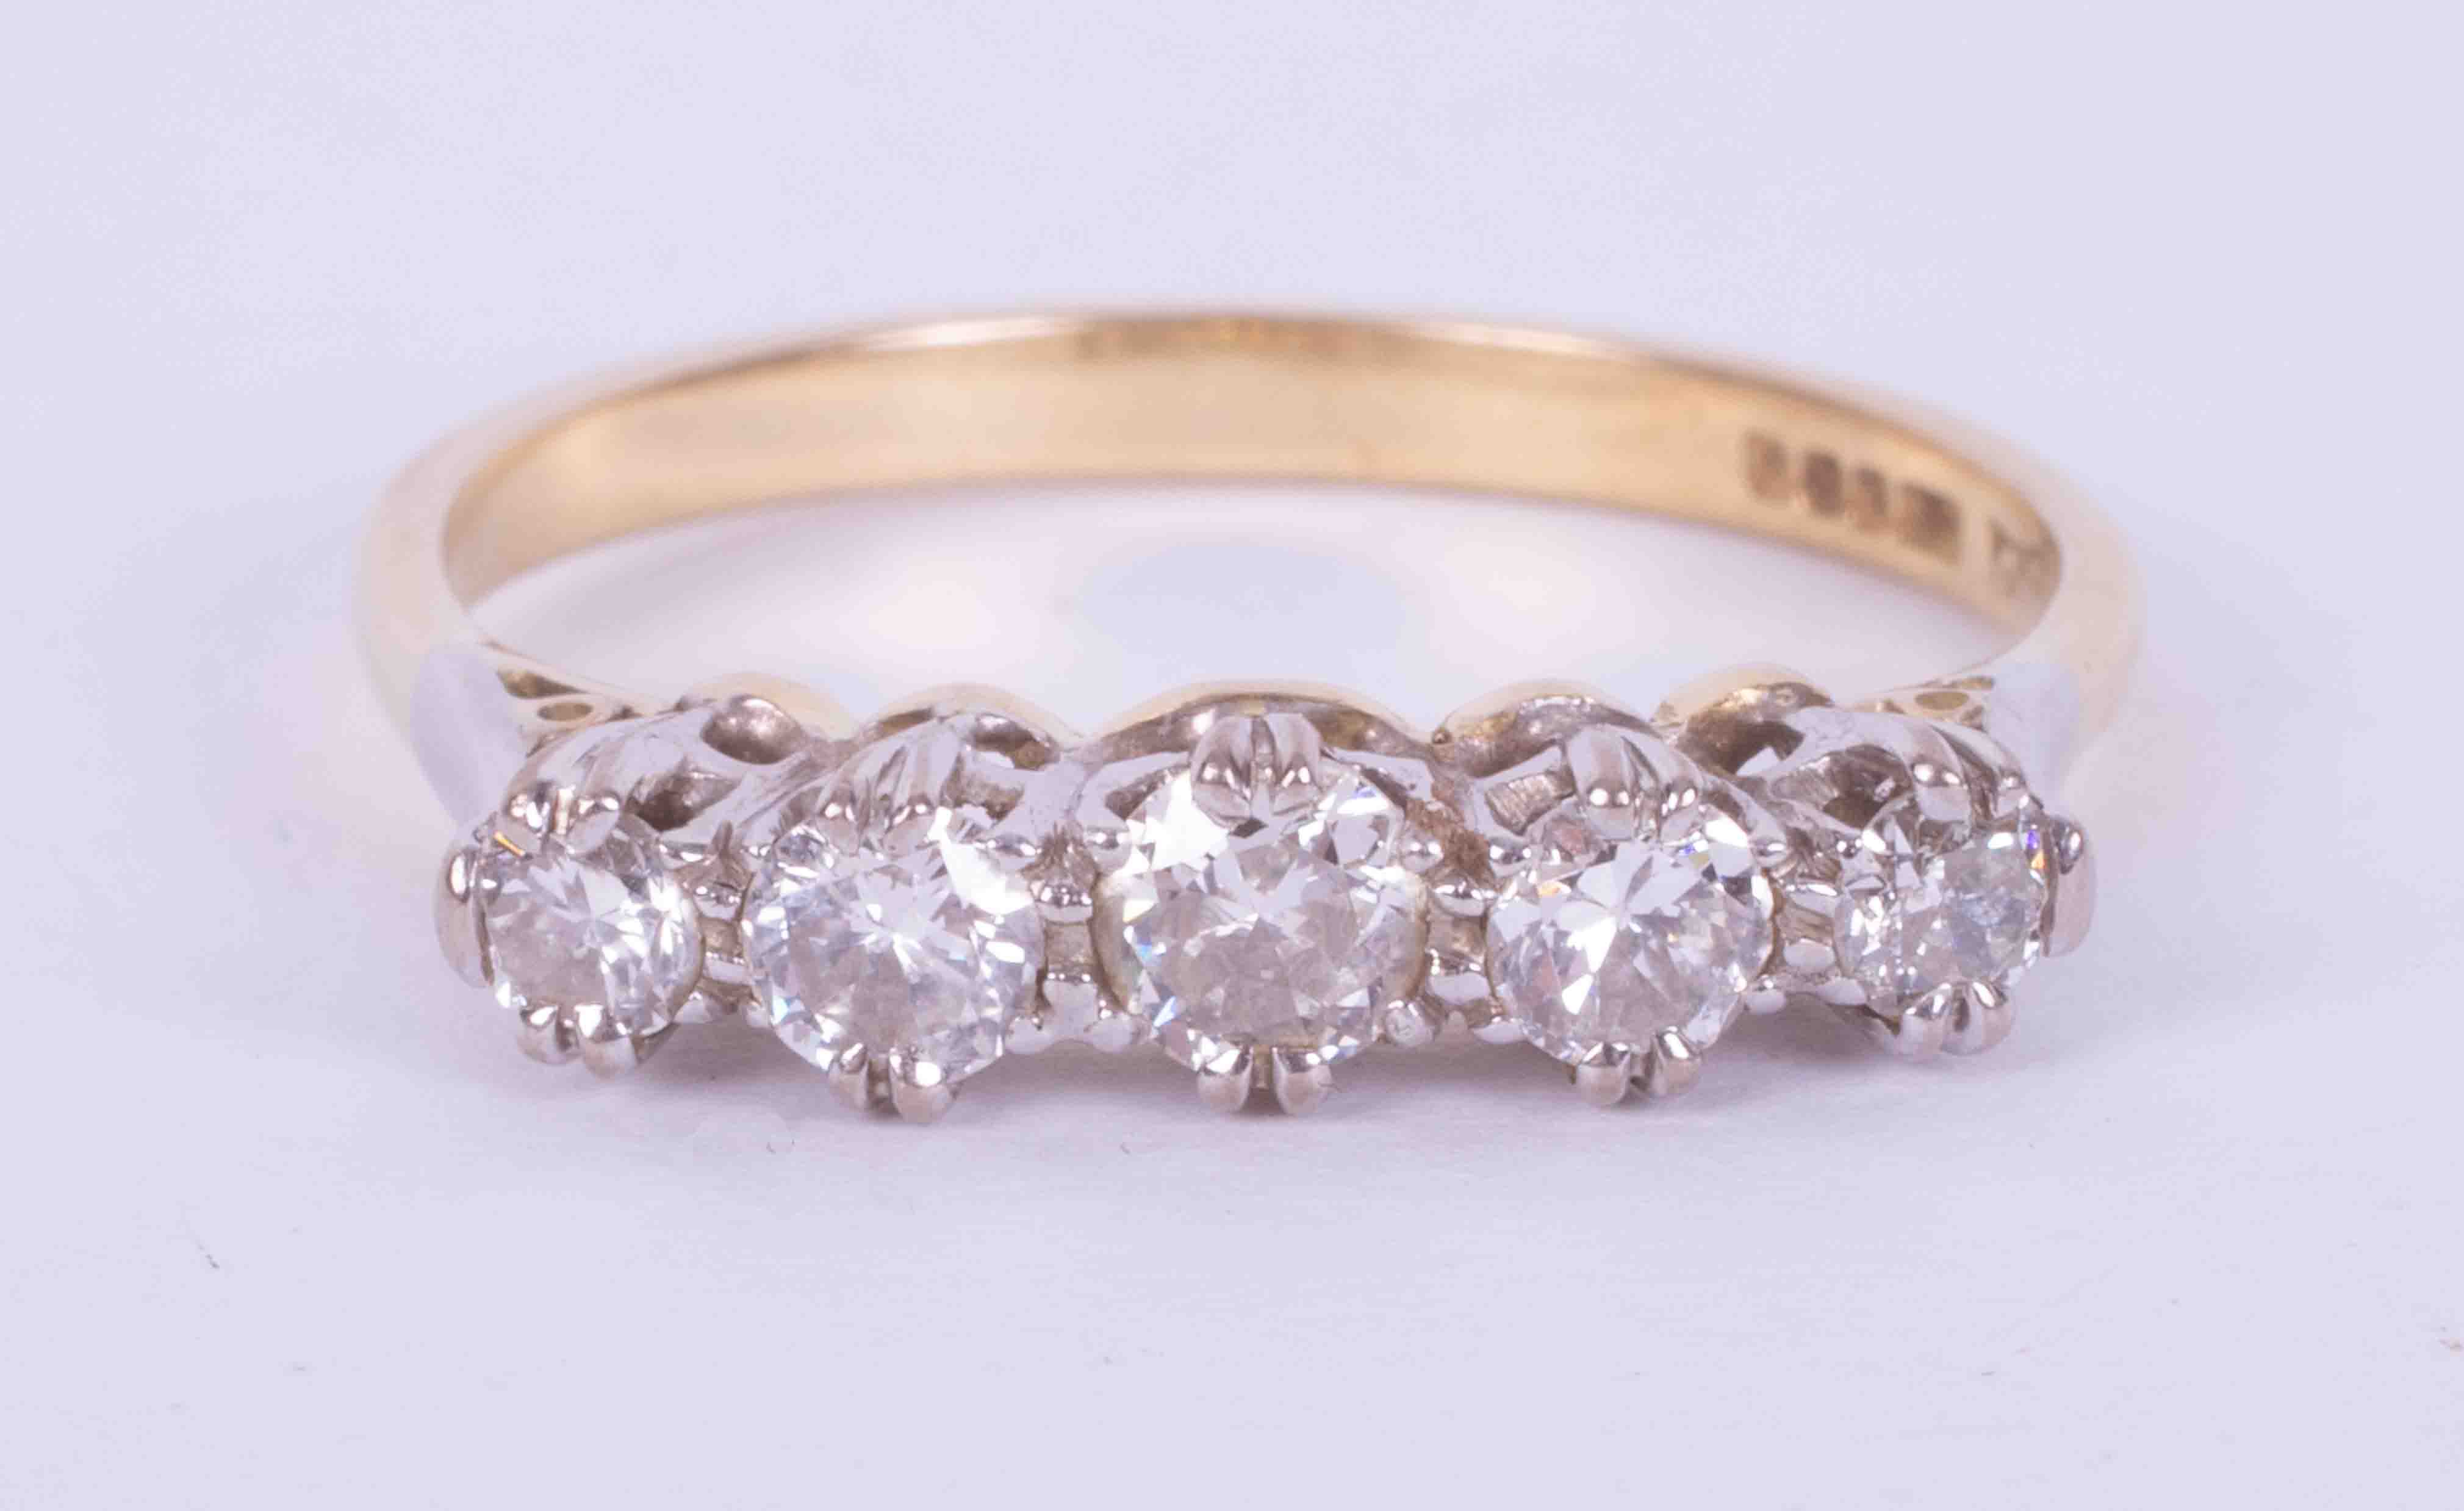 An 18ct yellow & white gold five stone ring set with approx. 0.79 carats of round brilliant cut